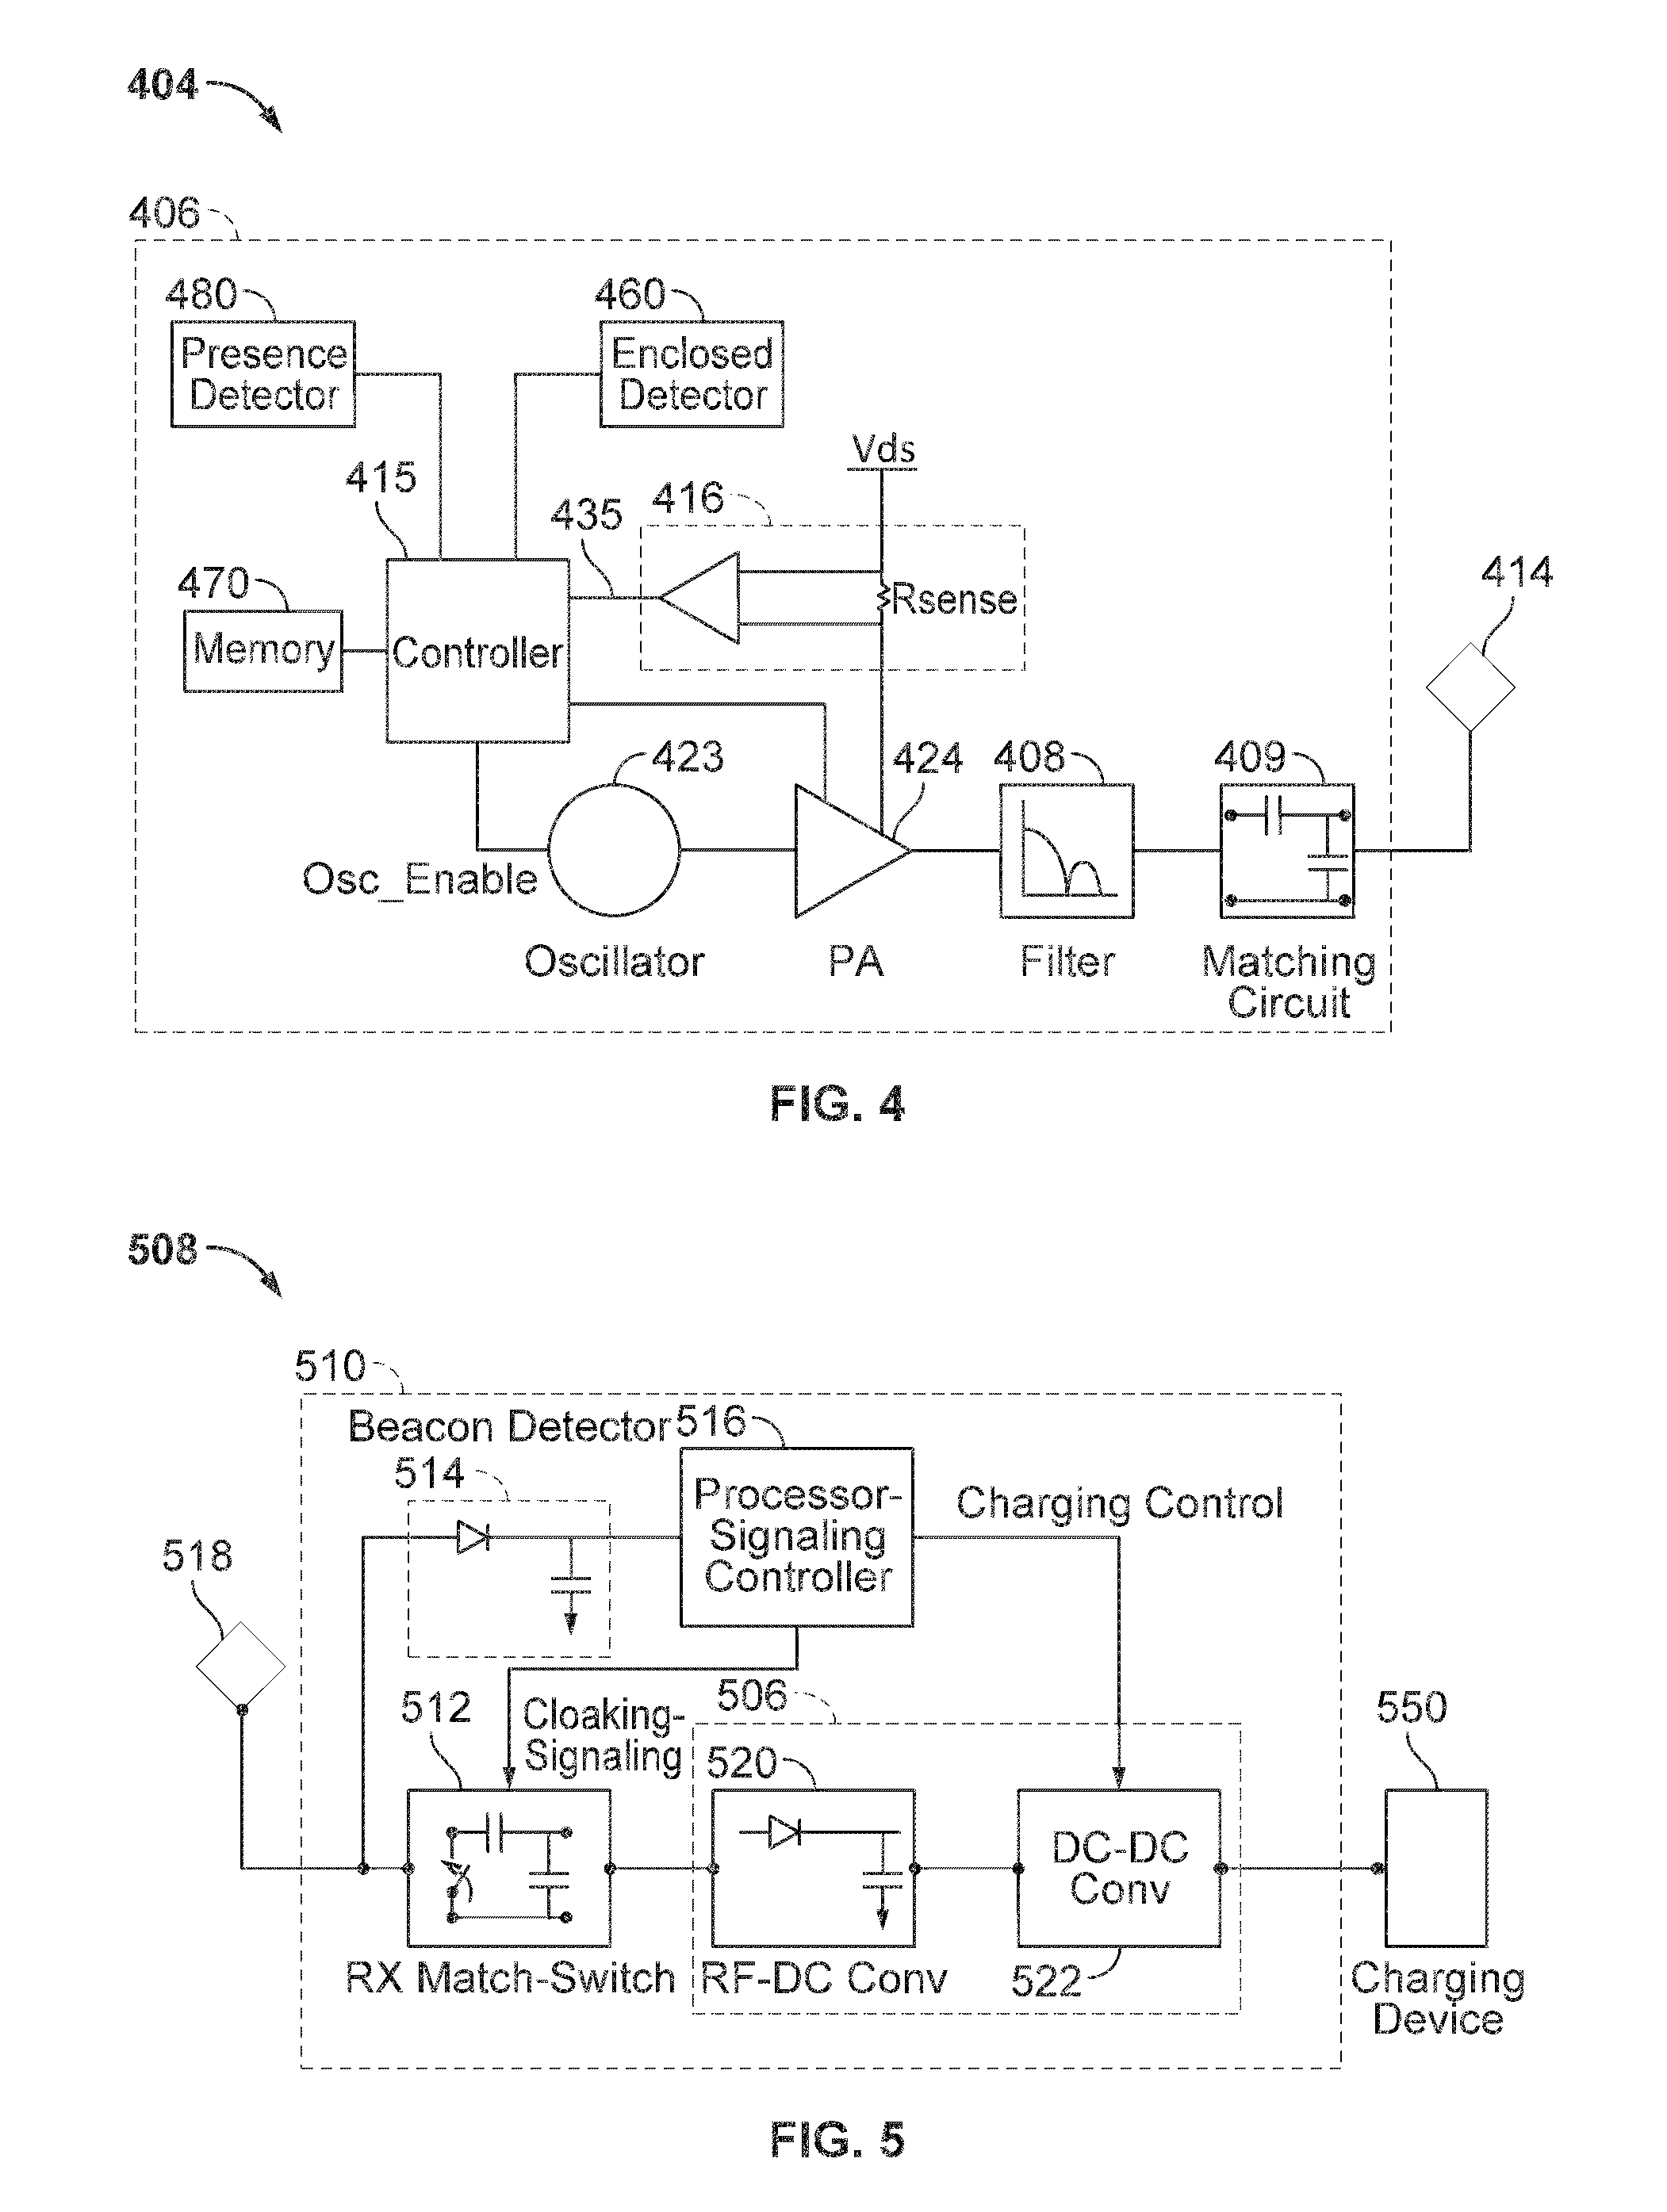 System and method for wireless power control communication using bluetooth low energy